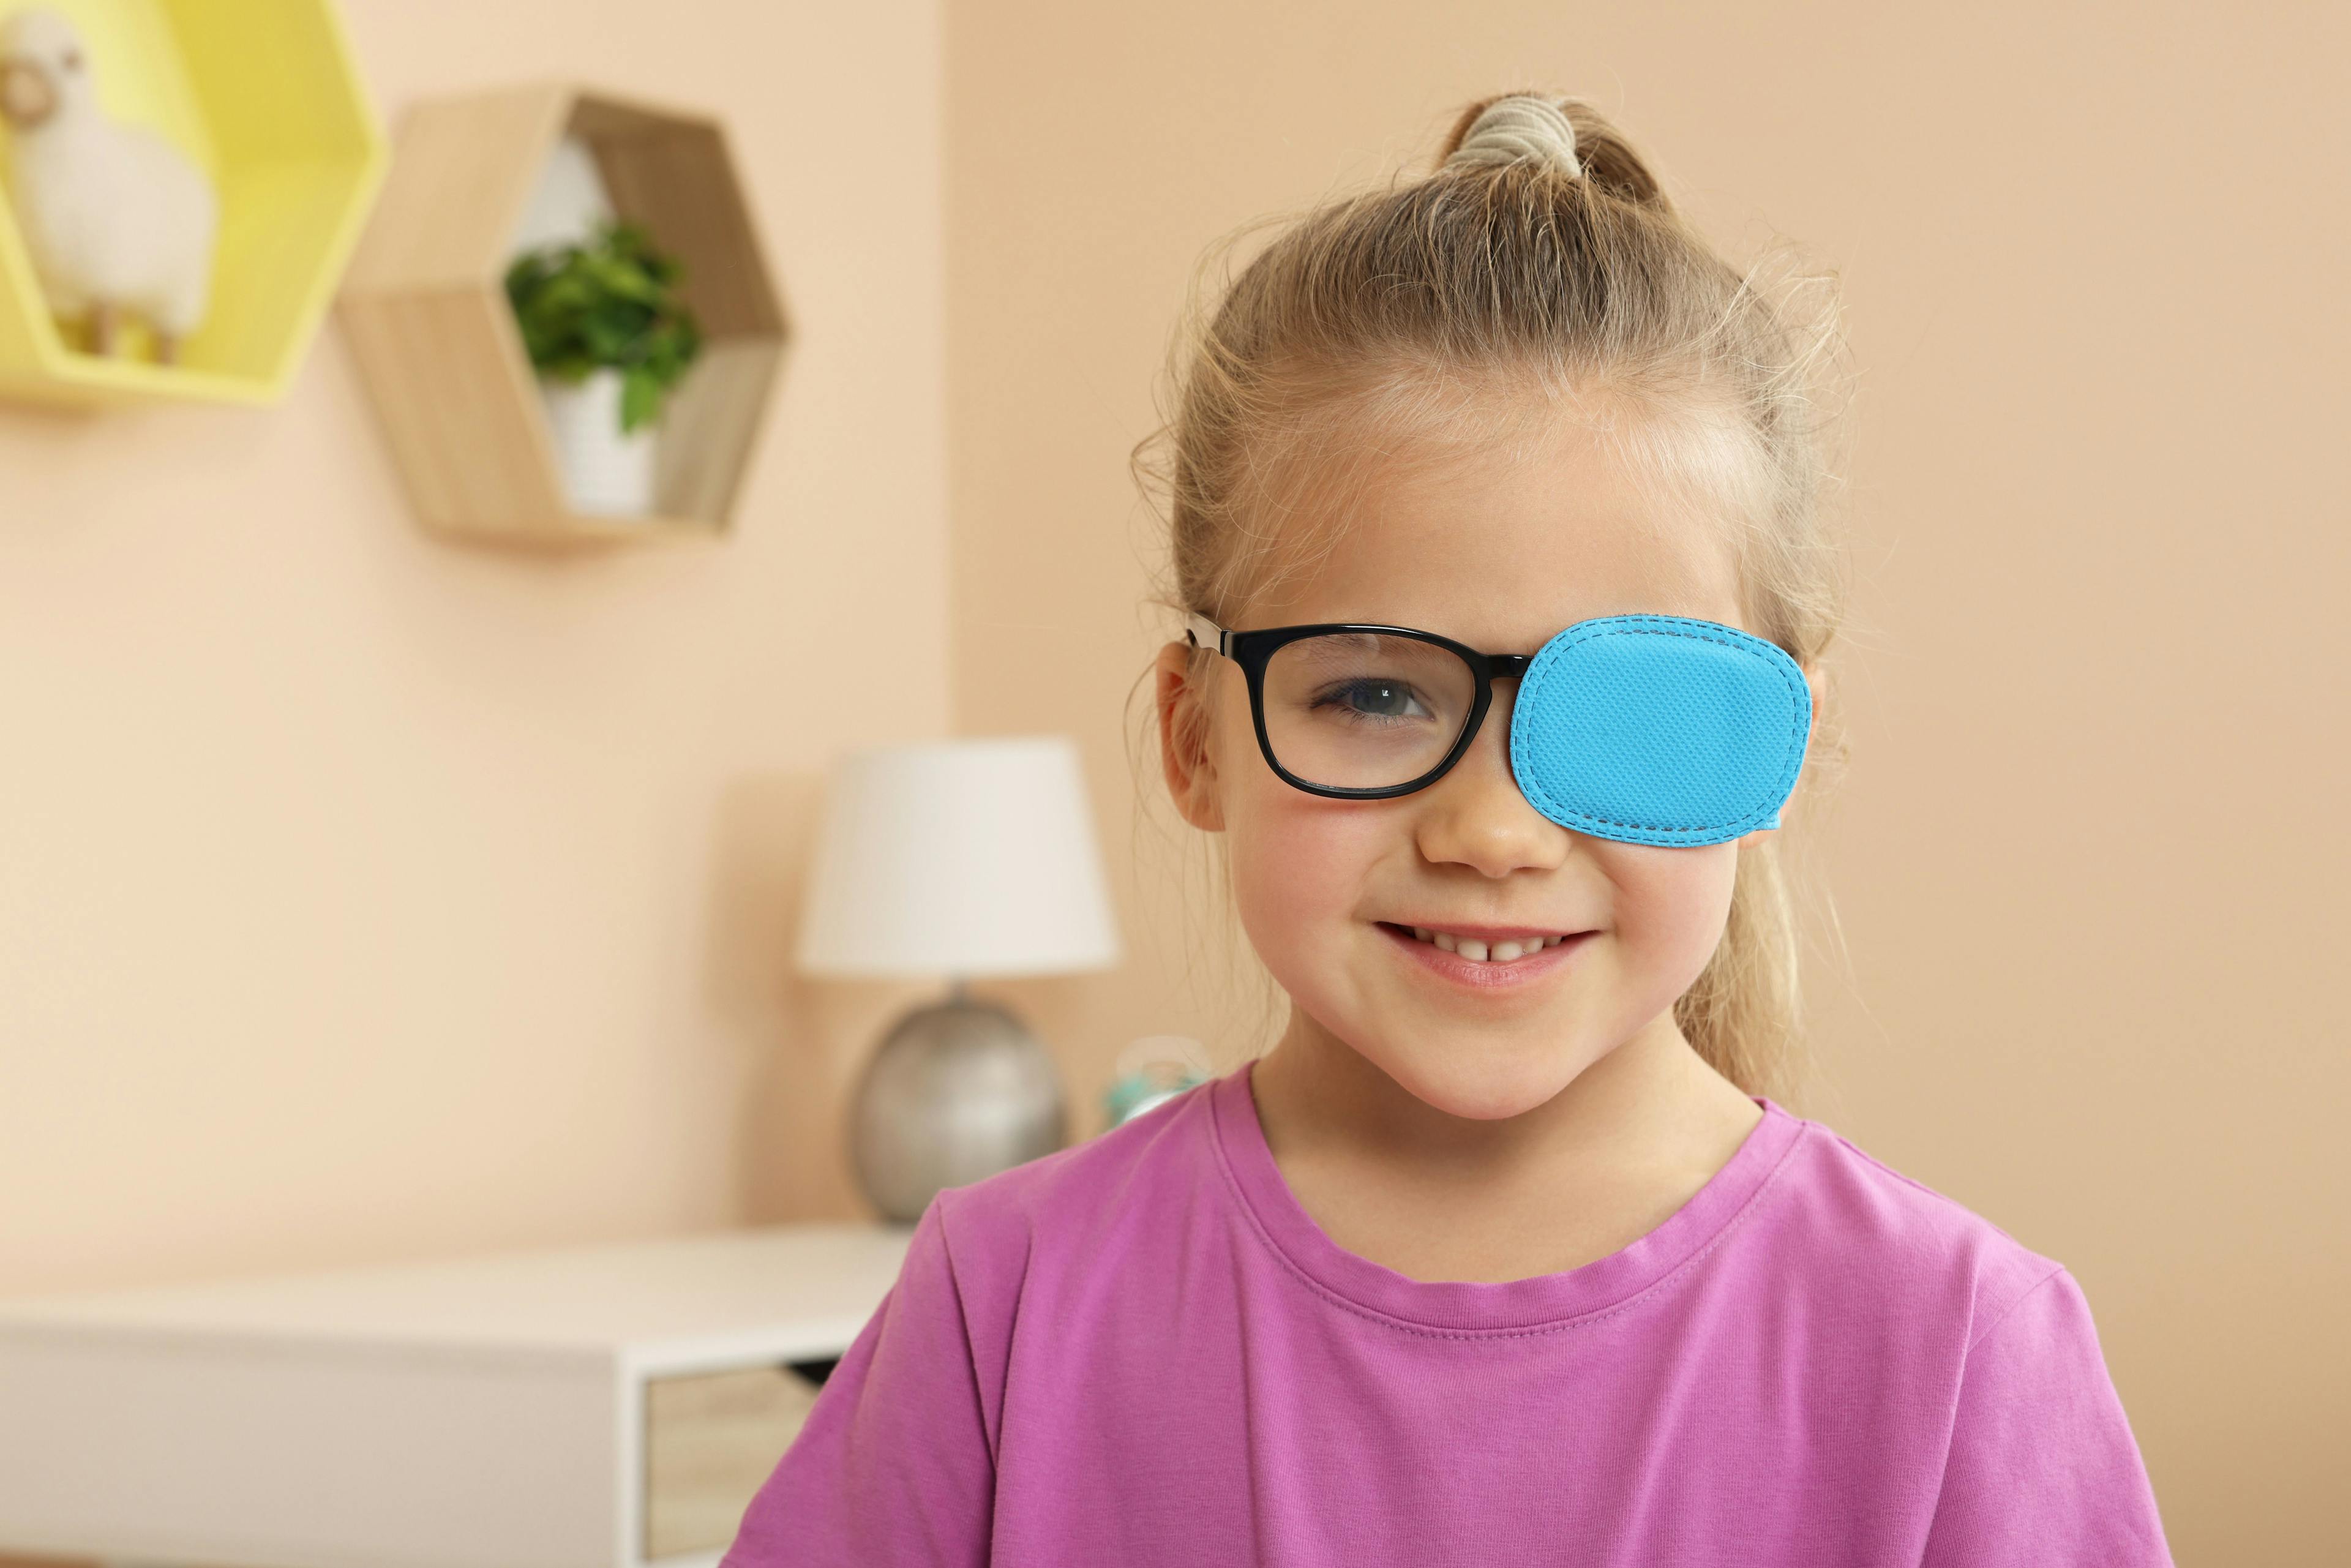 Young girl with eye patch | Image credit: New Africa - stock.adobe.com